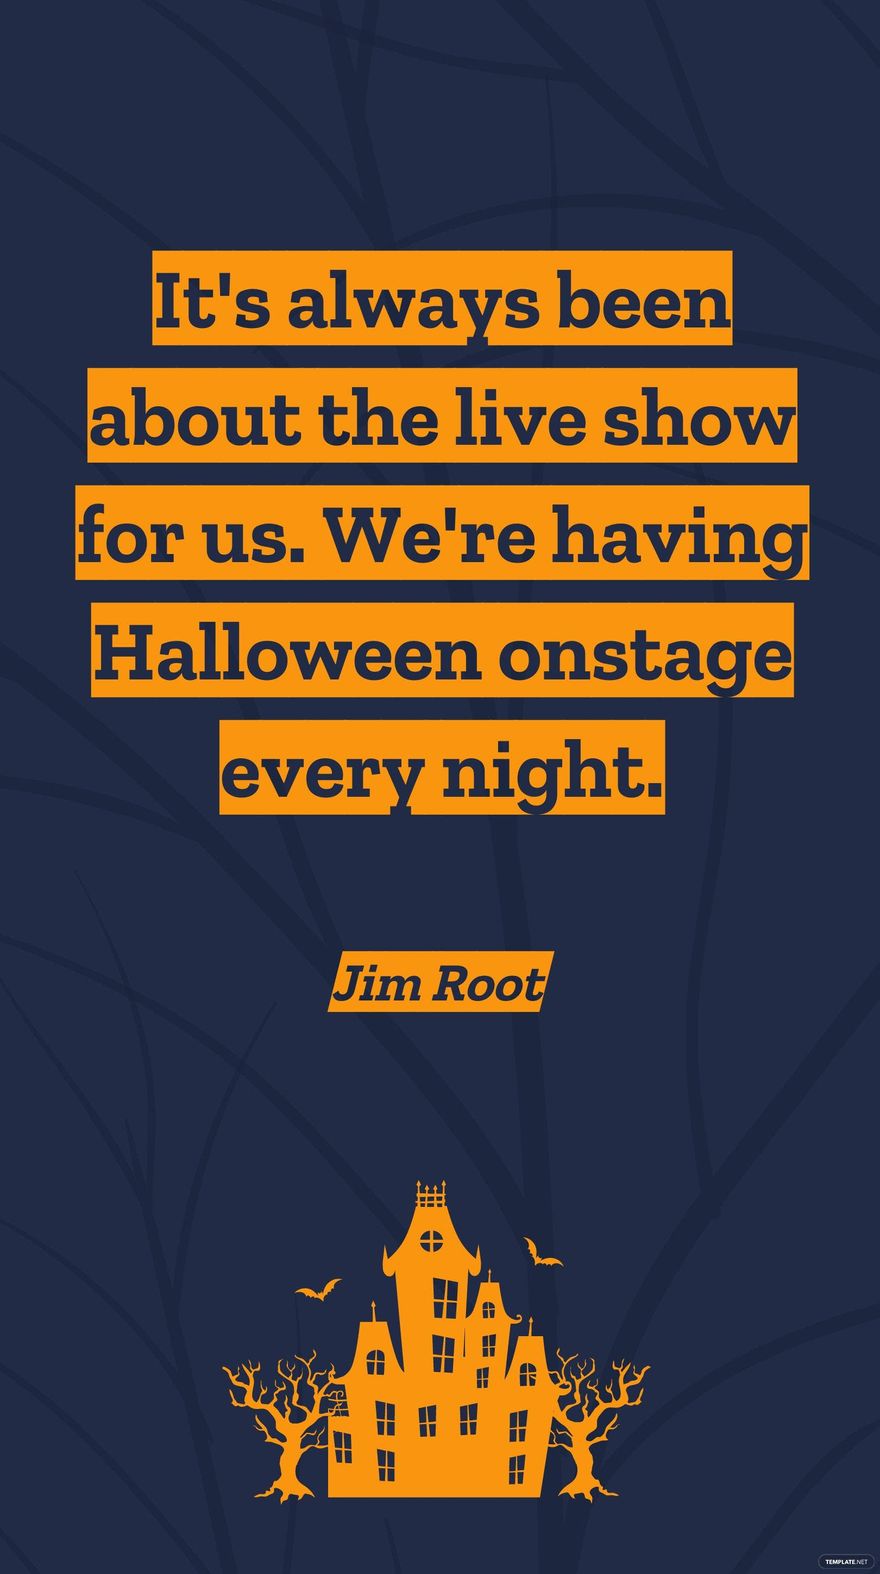 Free Jim Root - It's always been about the live show for us. We're having Halloween onstage every night.